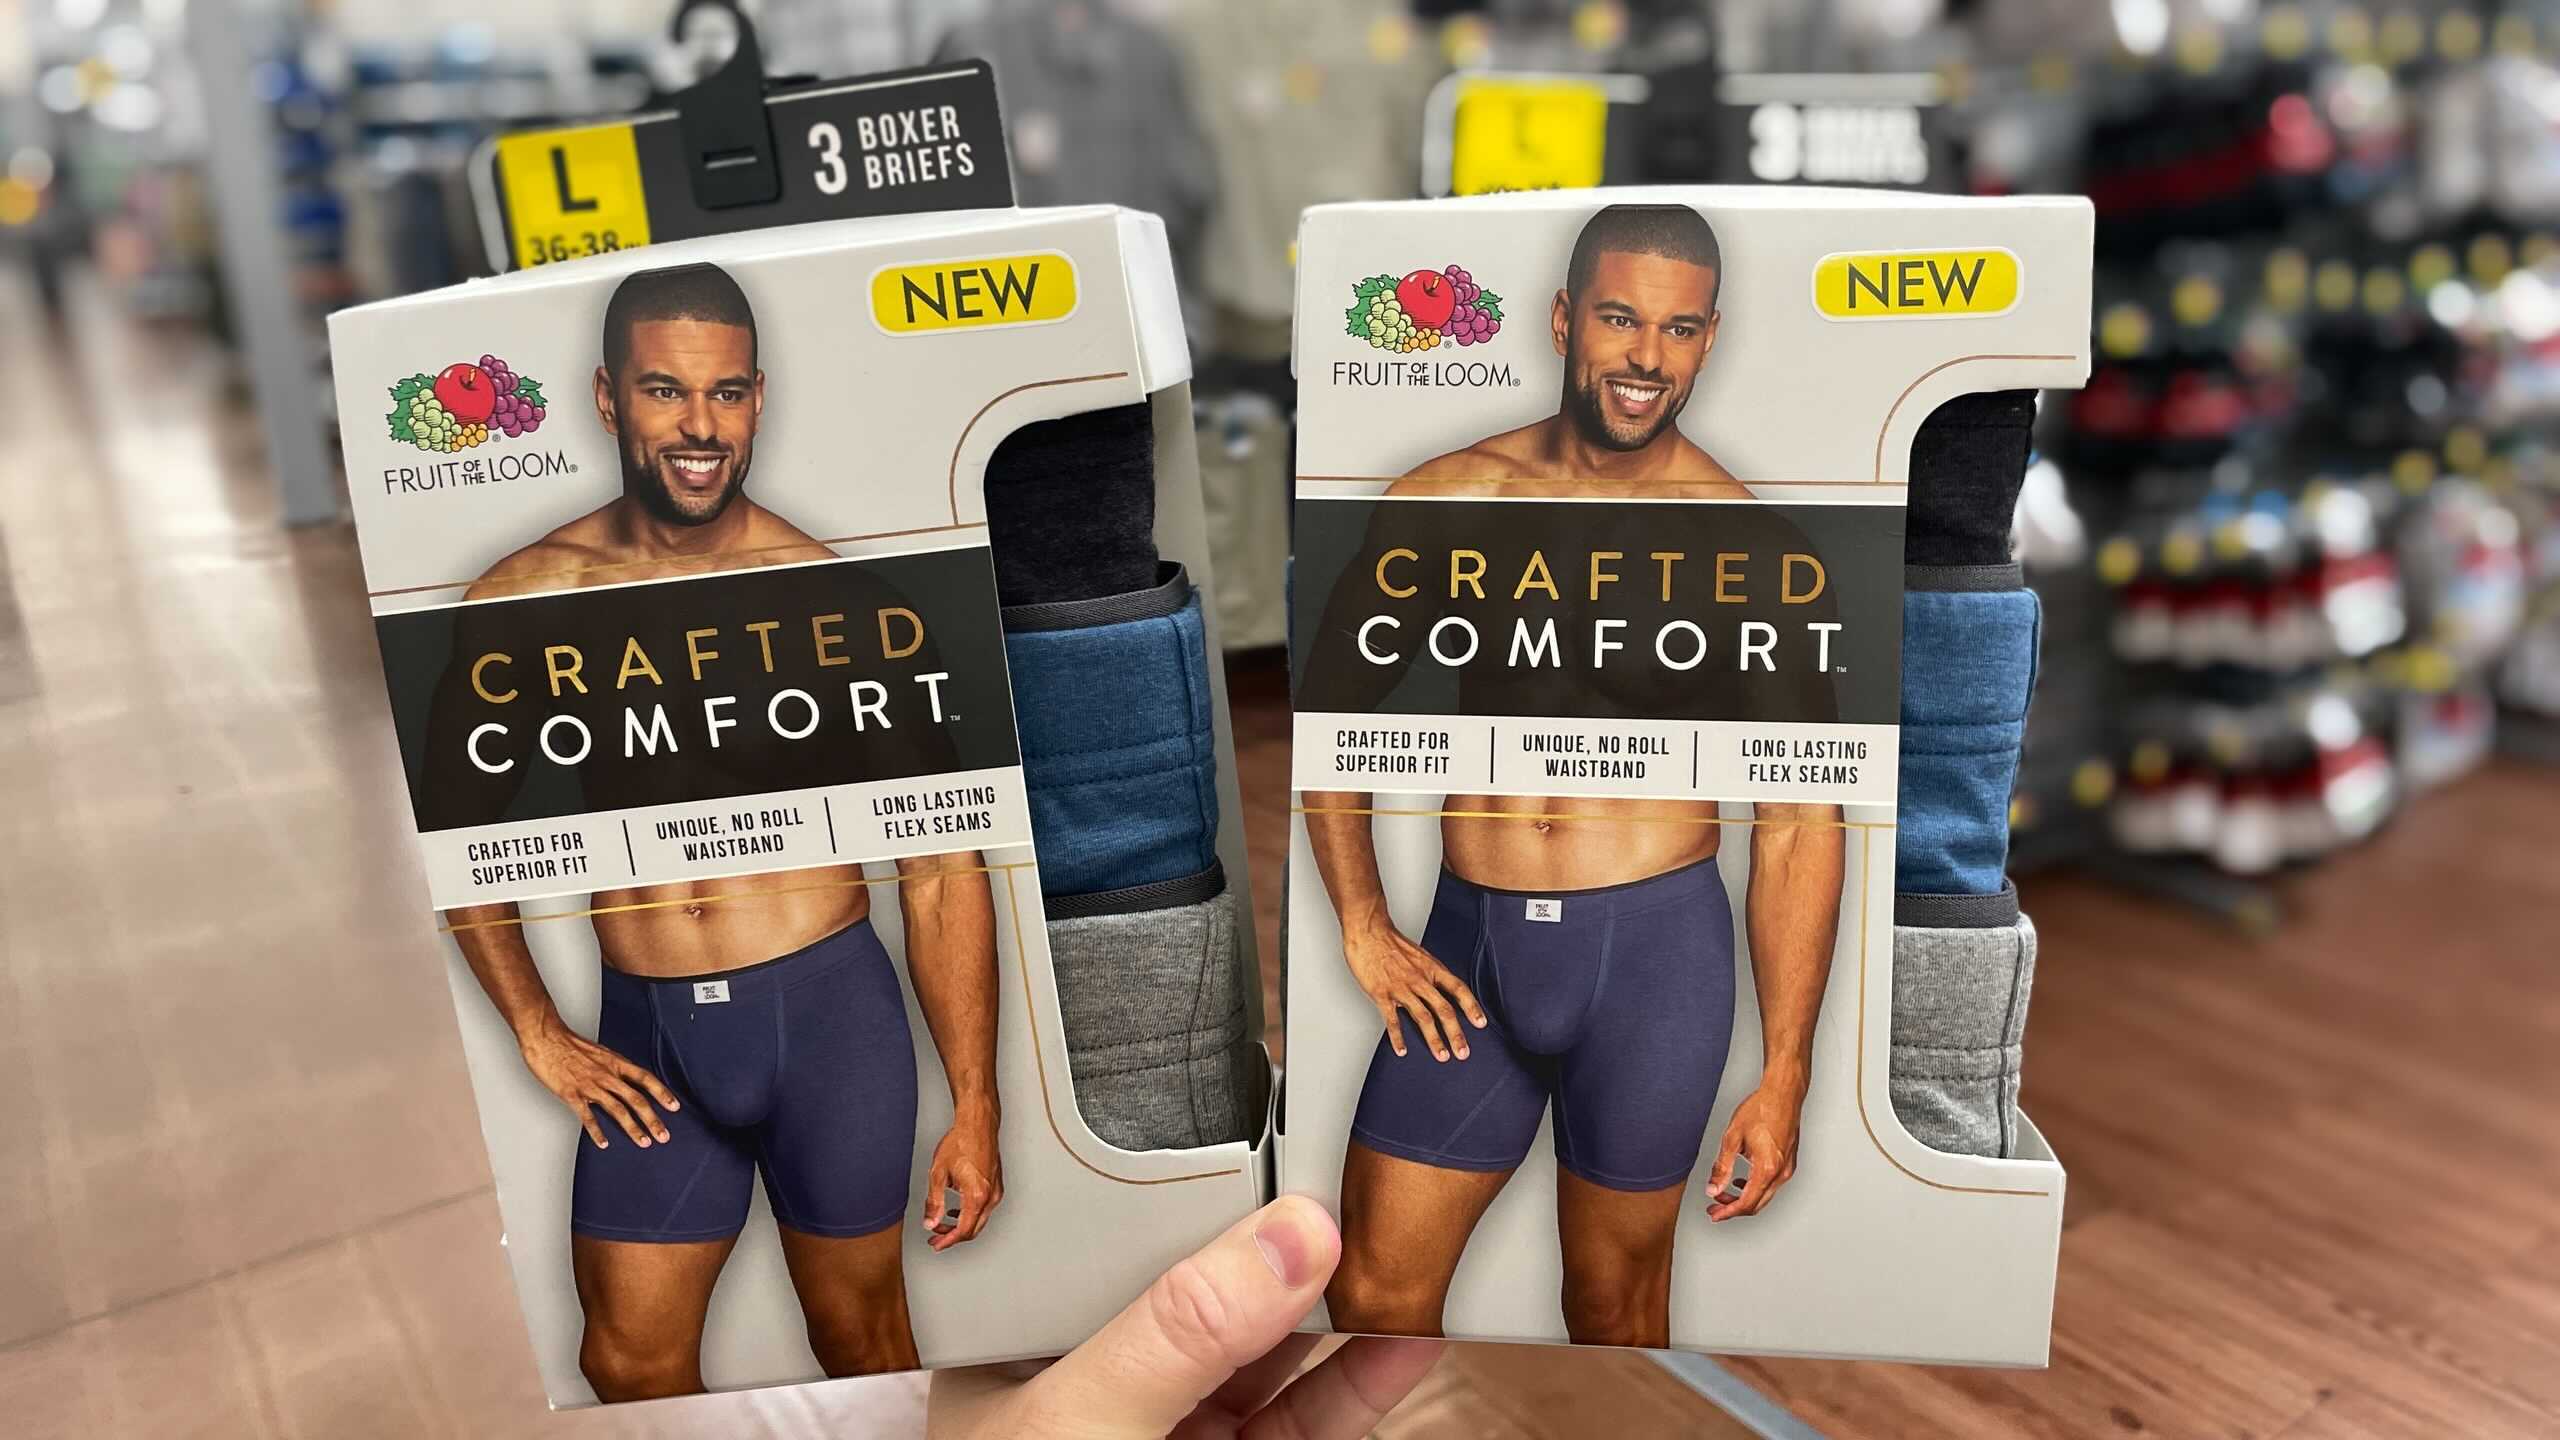 Fruit of the Loom Crafted Comfort Mens 3 Pack Boxer Briefs